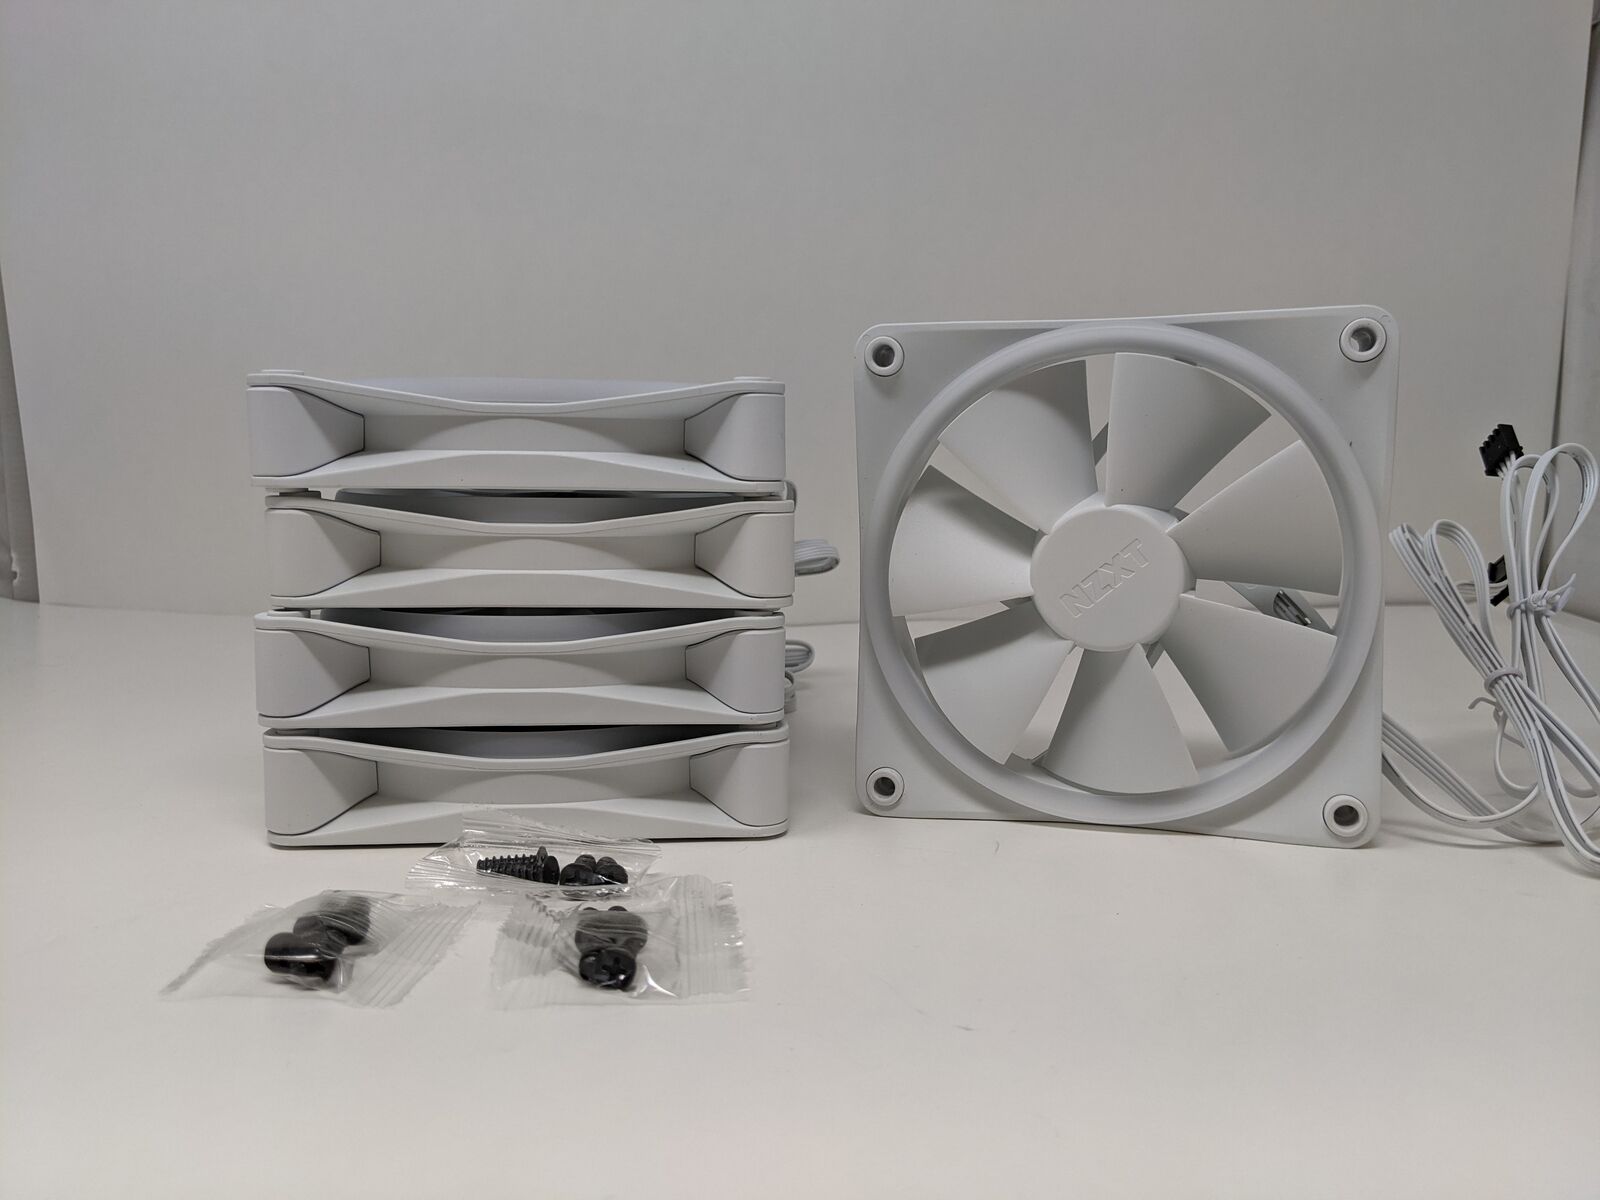  NZXT F120 RGB Fans - Controller Not Included - 120mm Fan - White  (F9)